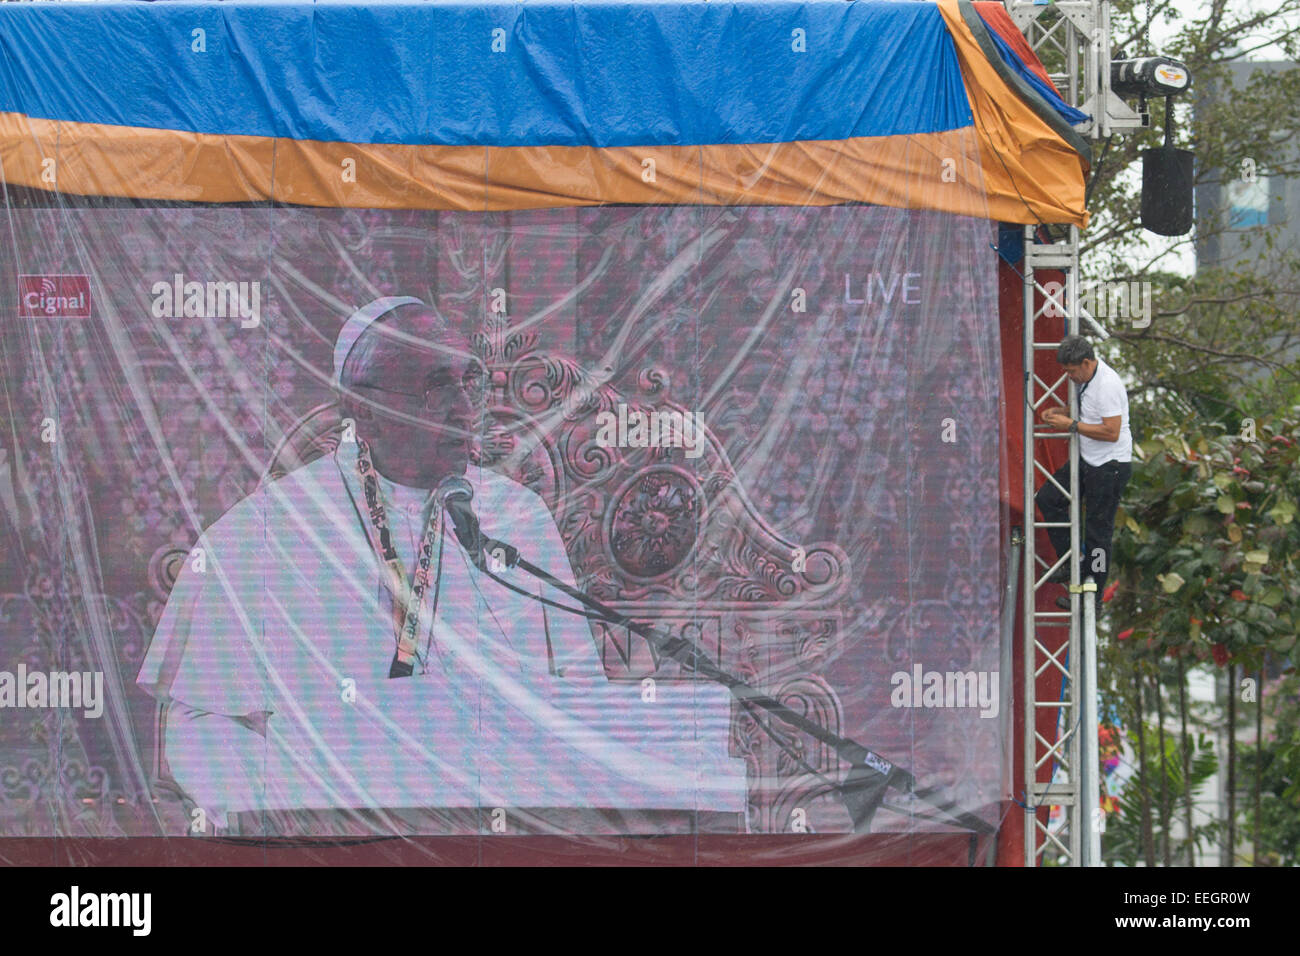 Manila, Philippines. 18th Jan, 2018. A man fixes the tarpulin on the LCD as Pope Francis gives a message at the University of Santo Tomas on January 18, 2015. The Pope had his closing mass at the Quirino Granstand after his visit at the school with estimated crowd of 6-7 million. Credit:  Mark Fredesjed Cristino/Alamy Live News Stock Photo